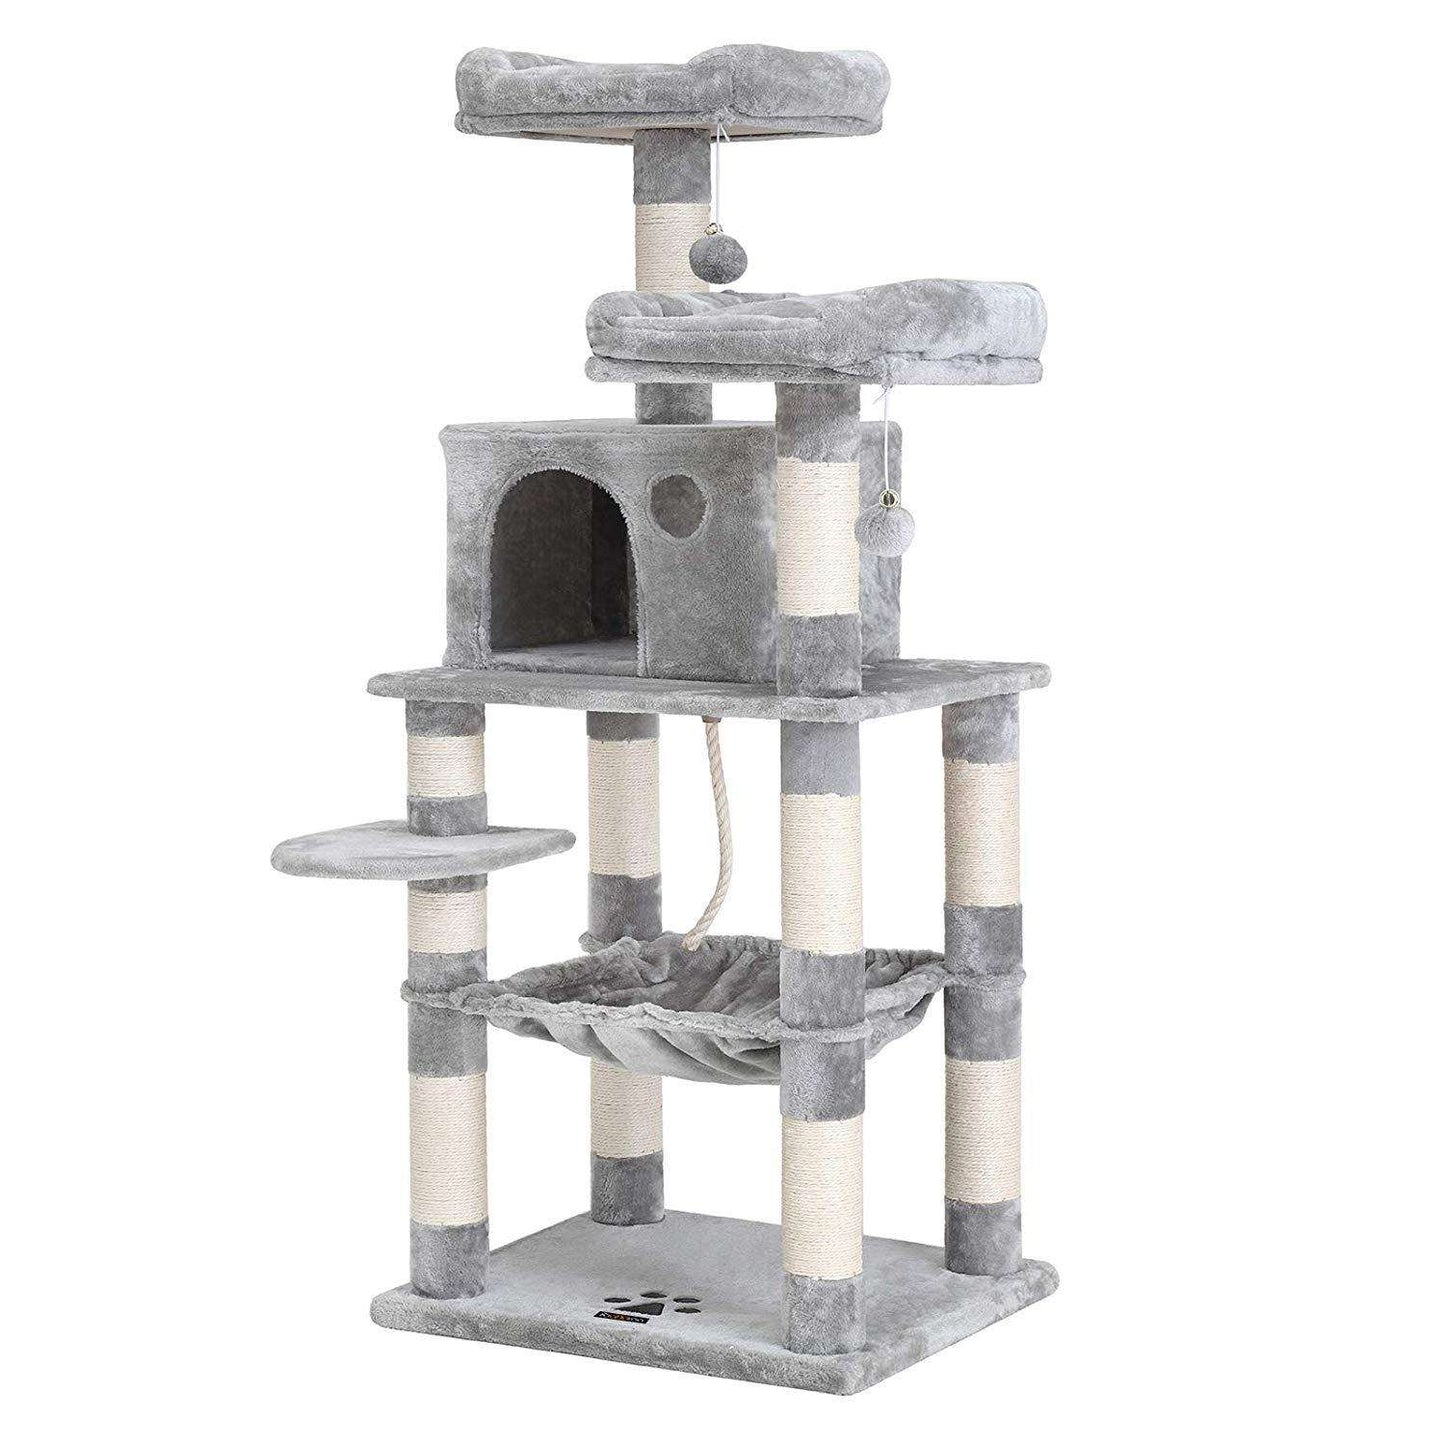 Nancy's Cathlamet Cat Tree - Scratching post - Climbing tree for cats - Cat Tower with cave - Light gray - 55 x 45 x 143 cm